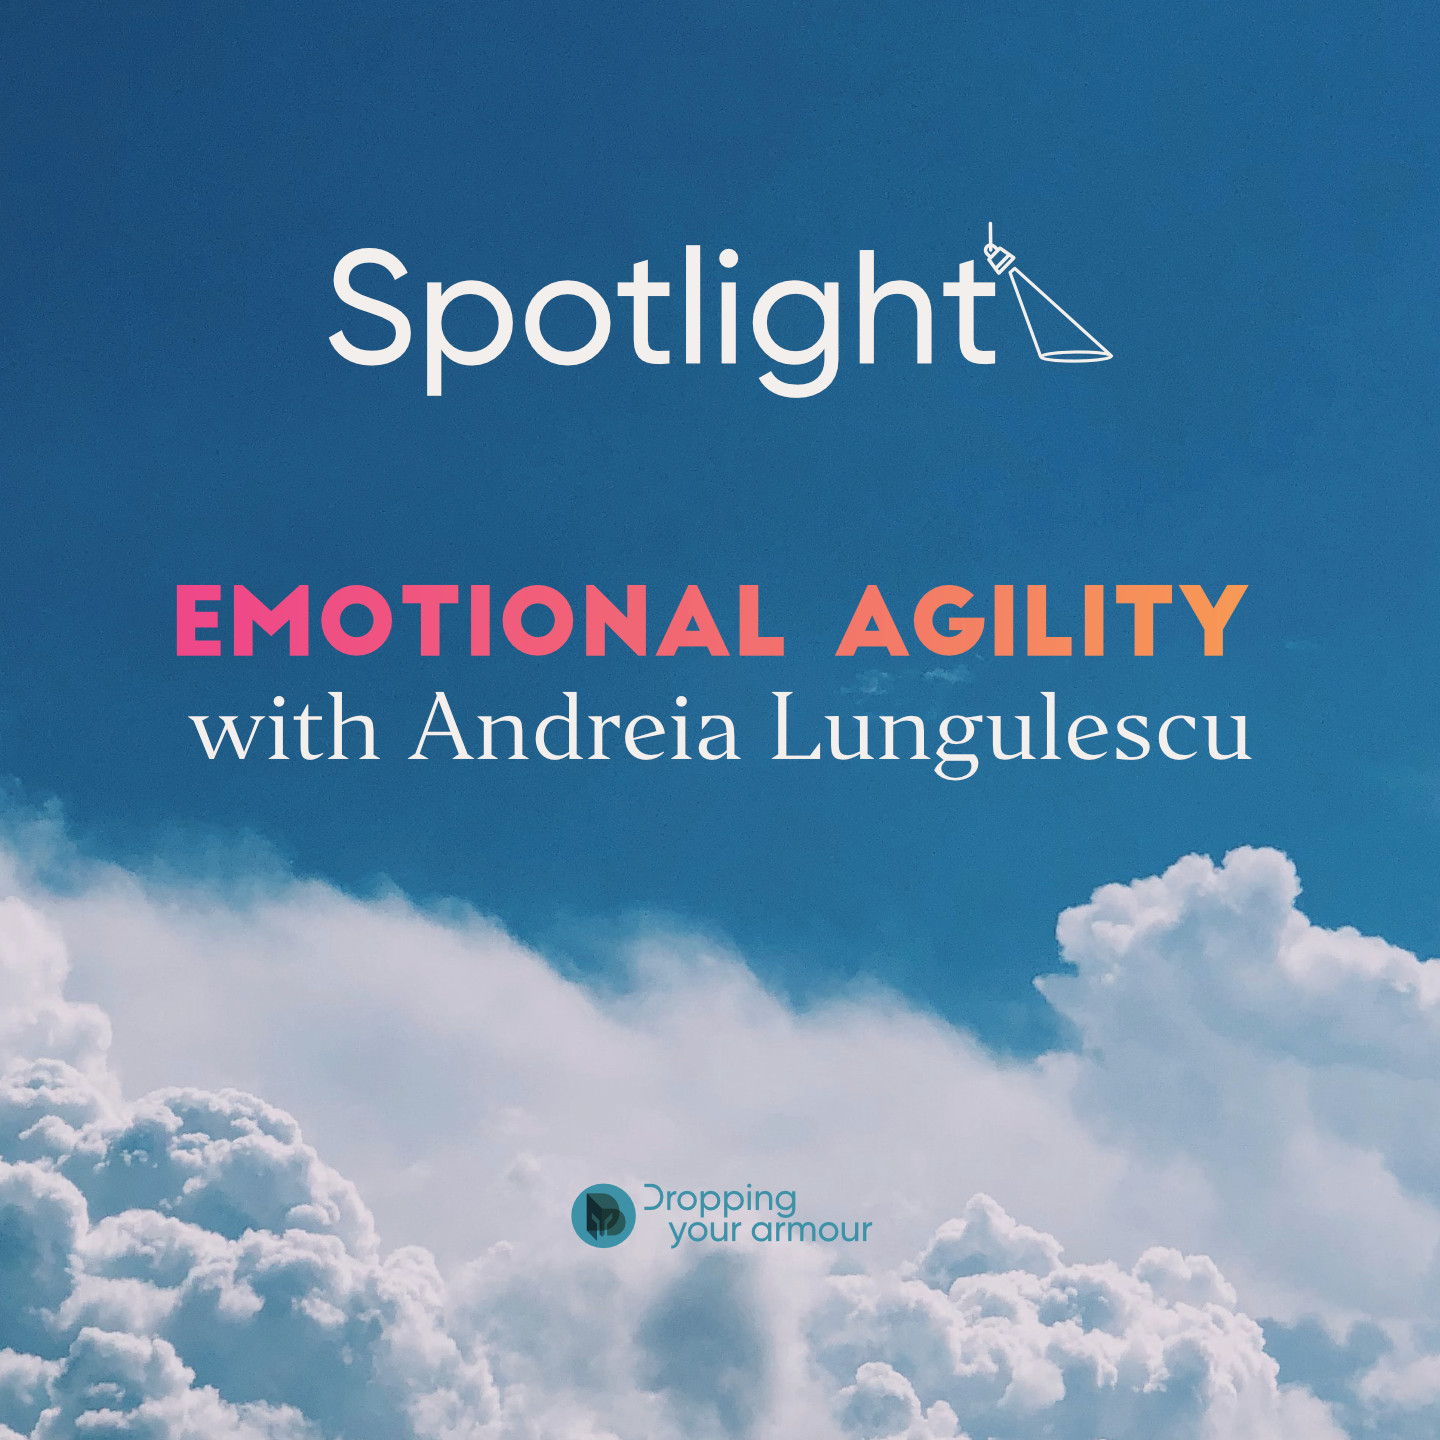 emotional agility visual with clouds on a blue sky